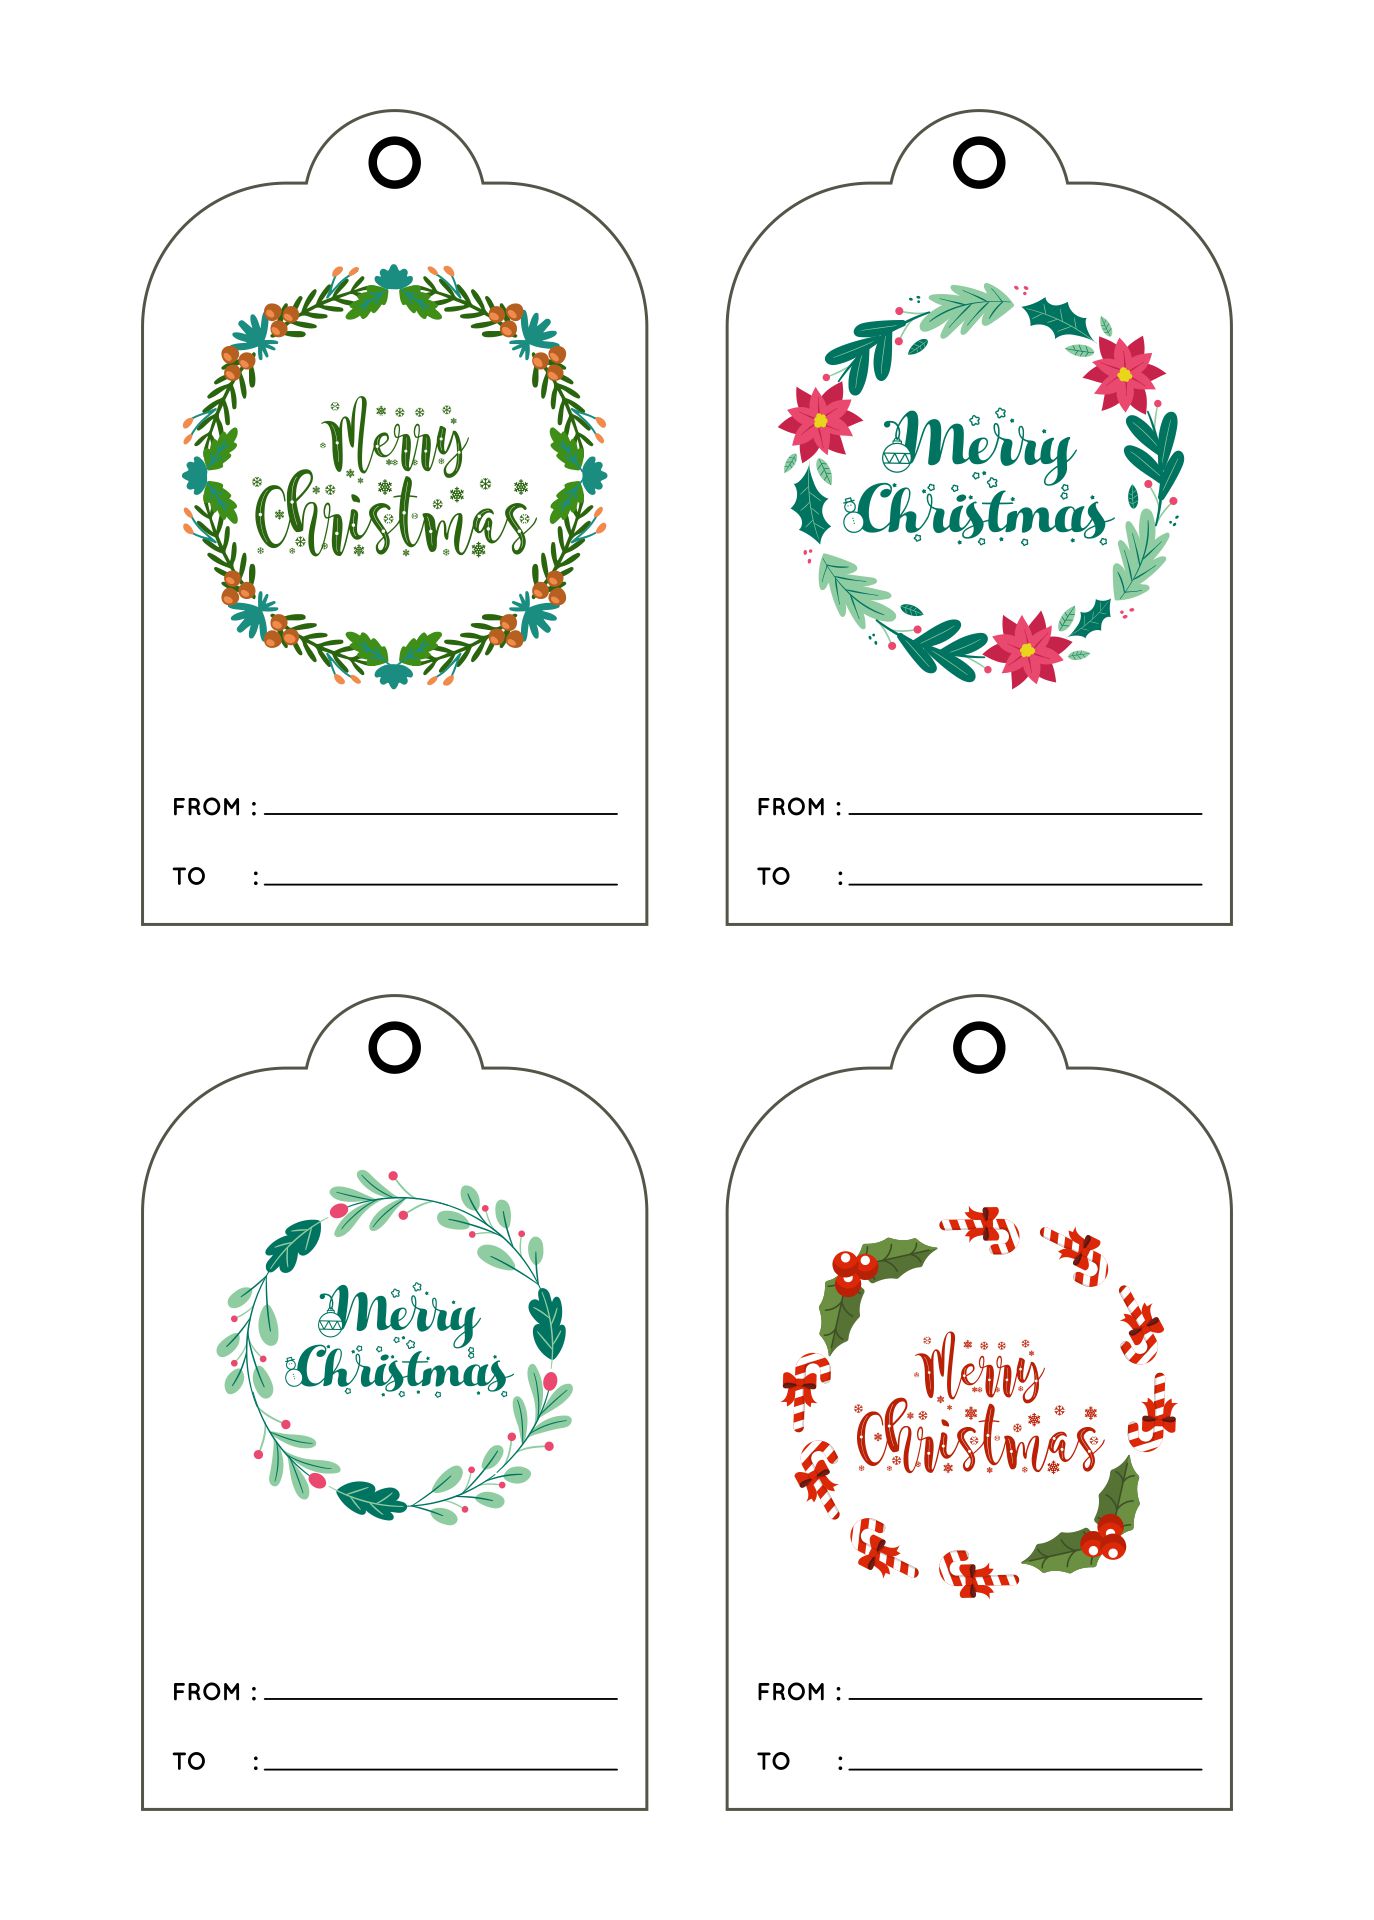 Rustic Christmas Wreath Tag Template